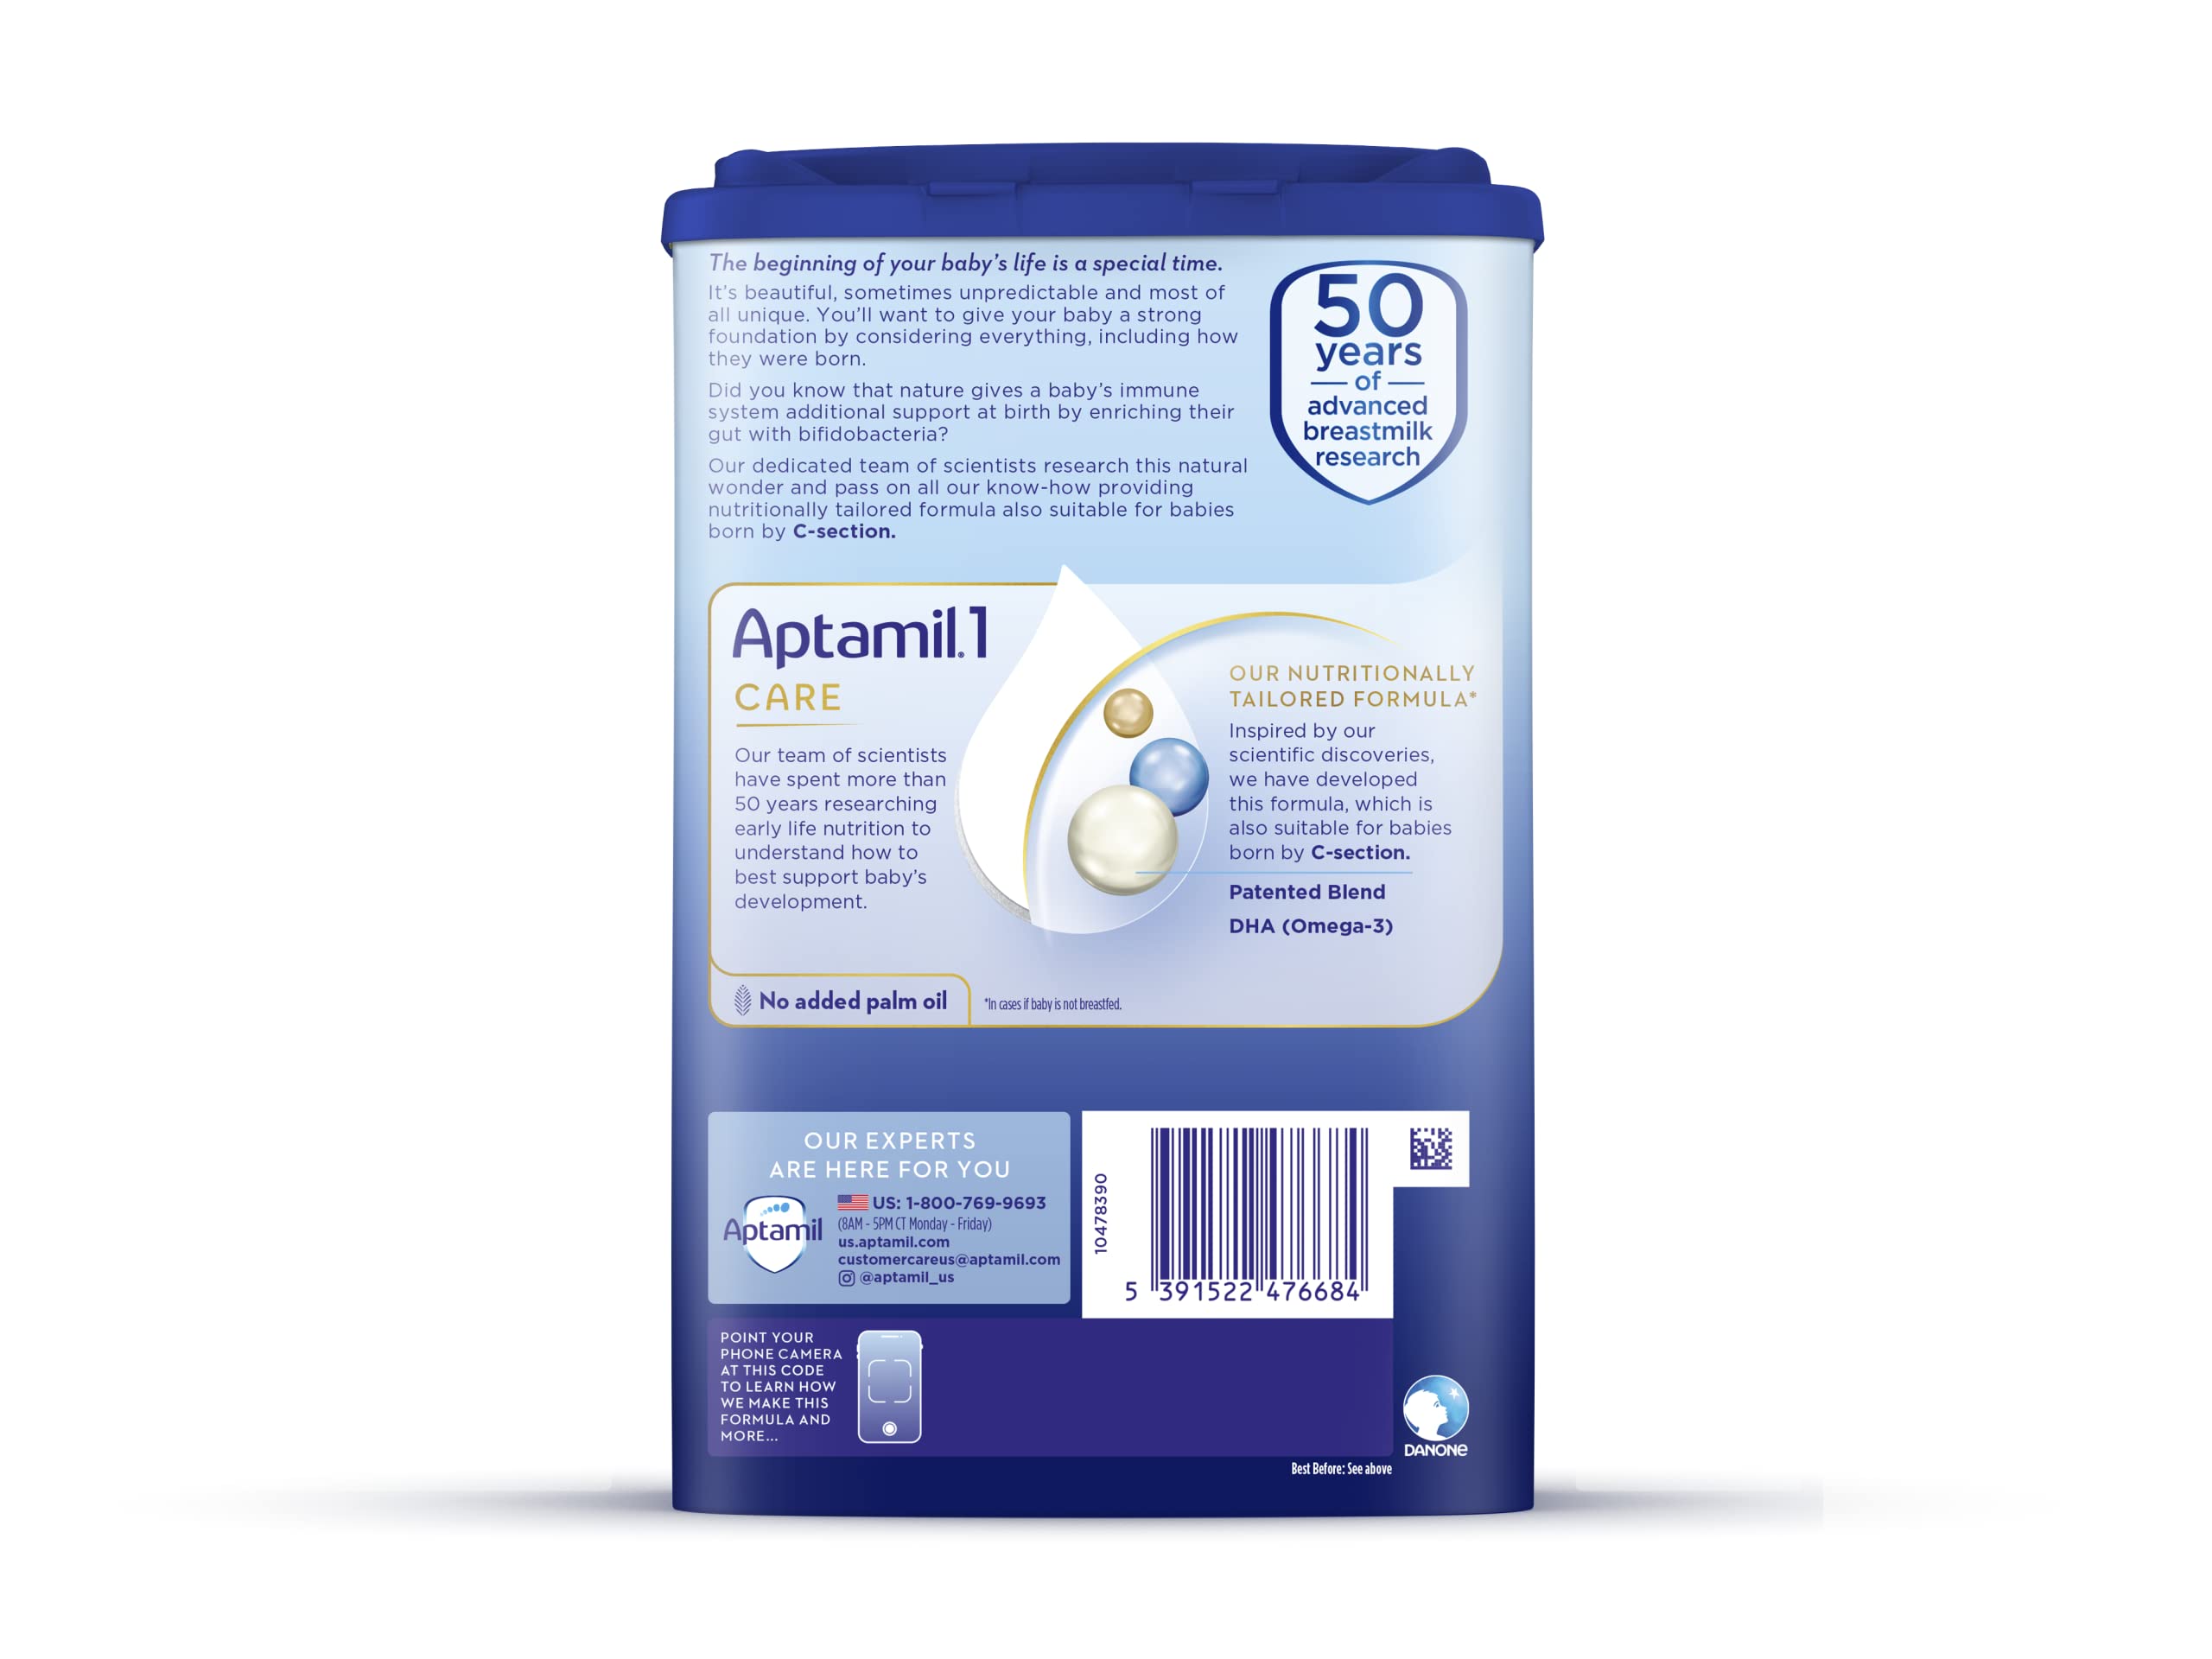 Aptamil Care Stage 1, Milk Based Powder Infant Formula for 0-12 Months, with DHA & ARA, Omega 3 & 6, Prebiotics, Contains No Palm Oil, 28.2 Ounces